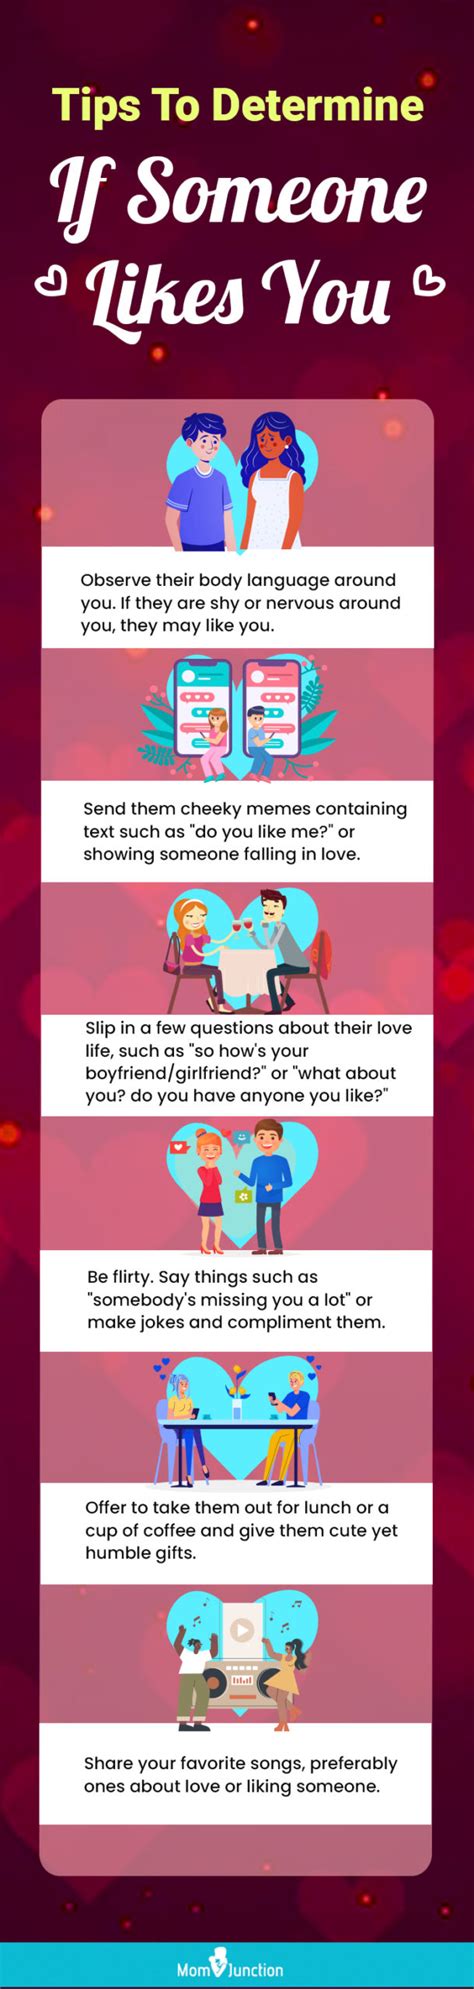 How To Ask Someone If They Like You 16 Clever Ways